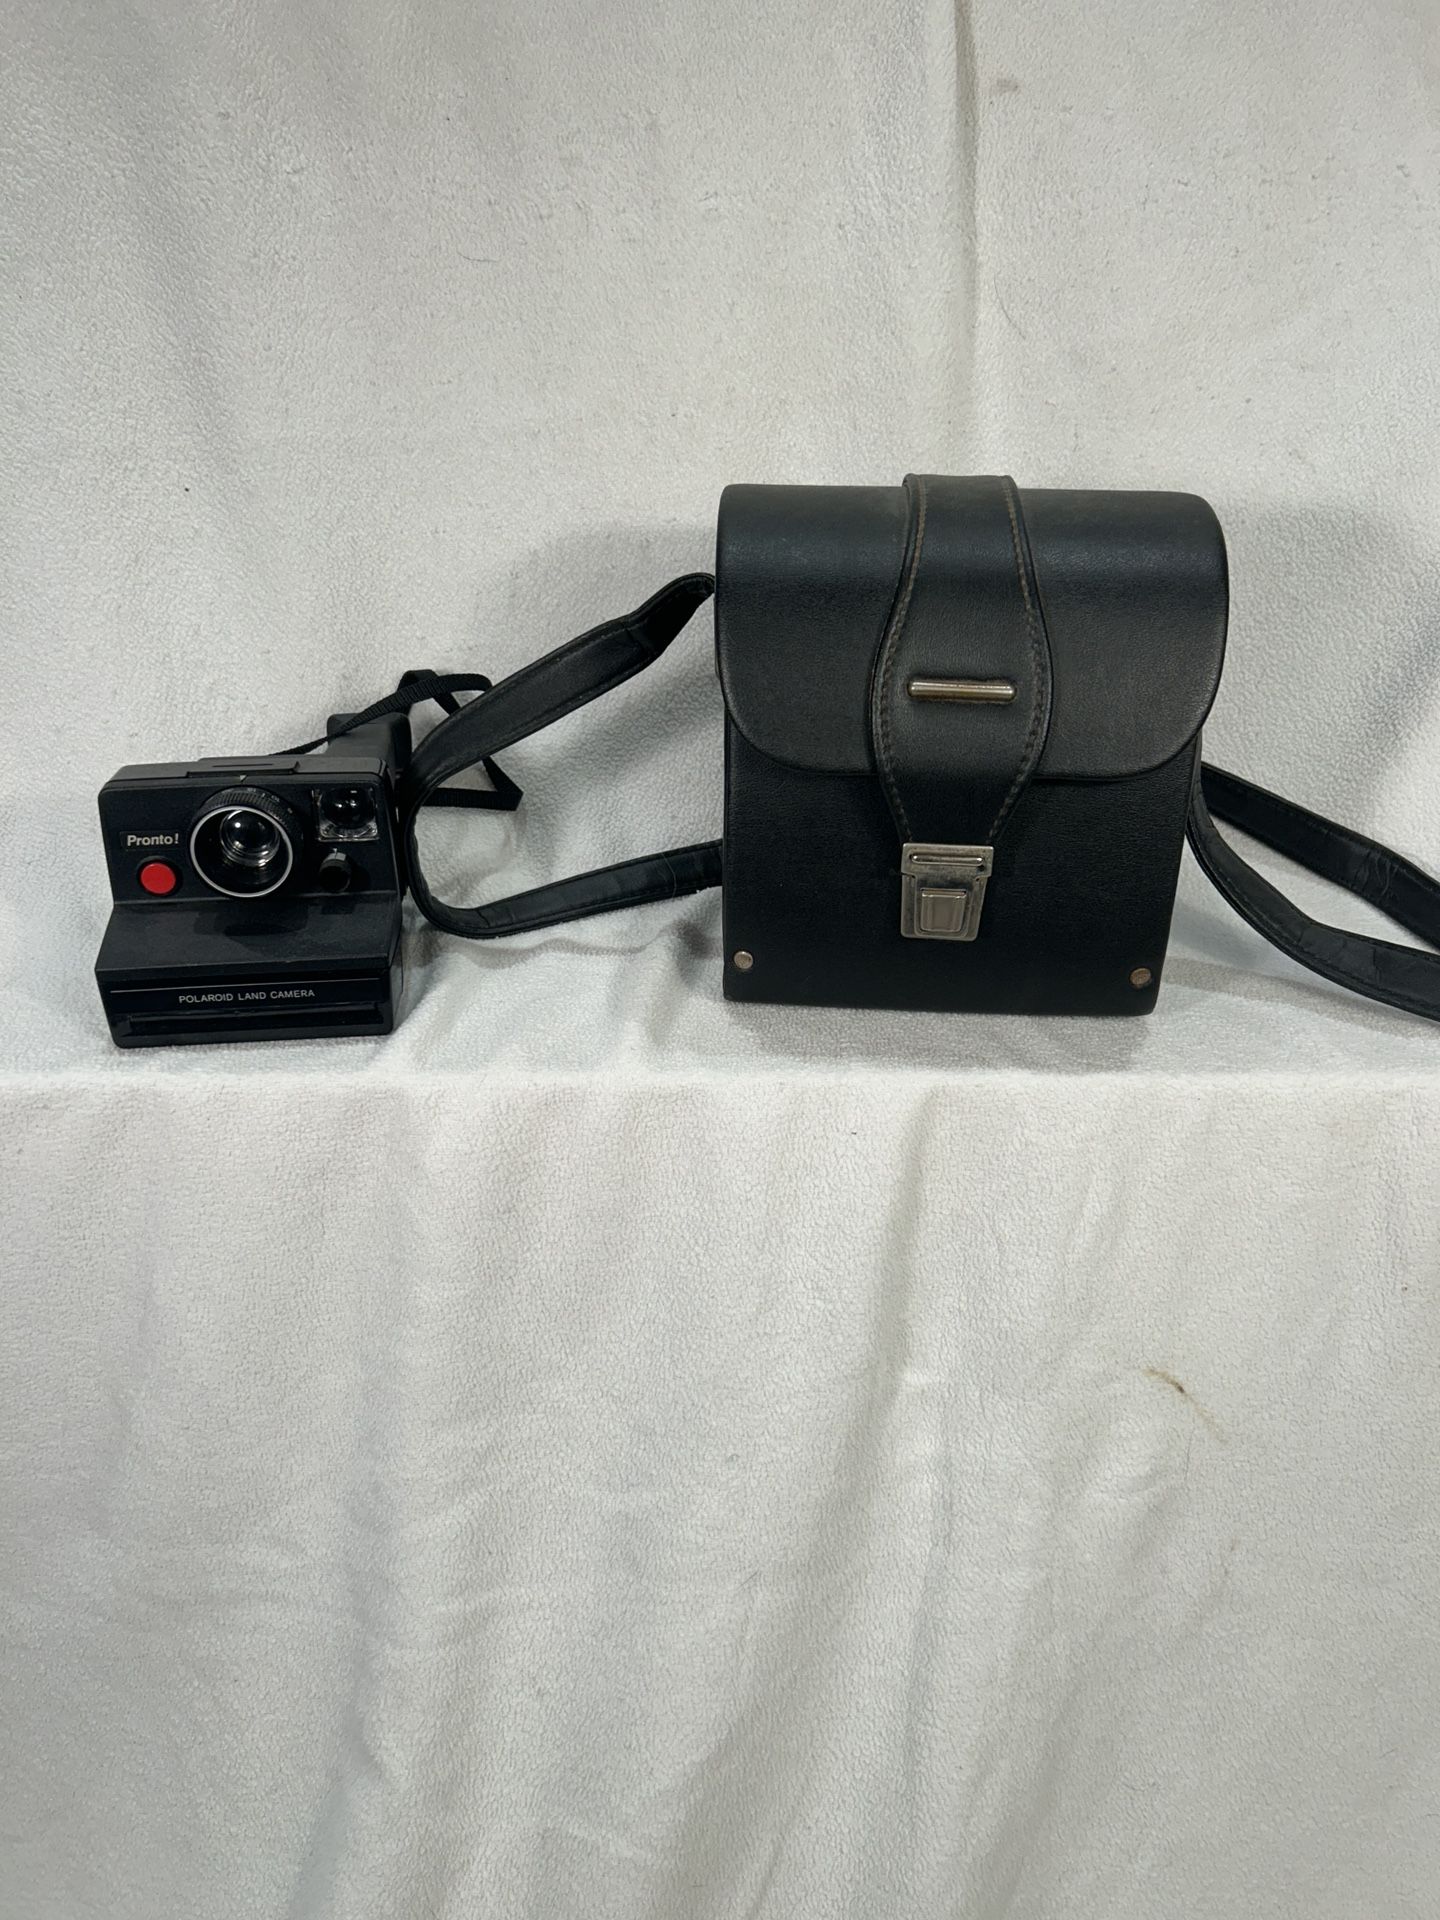 Polaroid Pronto! Instant Land Camera Uses SX-70 Film Vintage with Original Case and Manual - Tested and Works